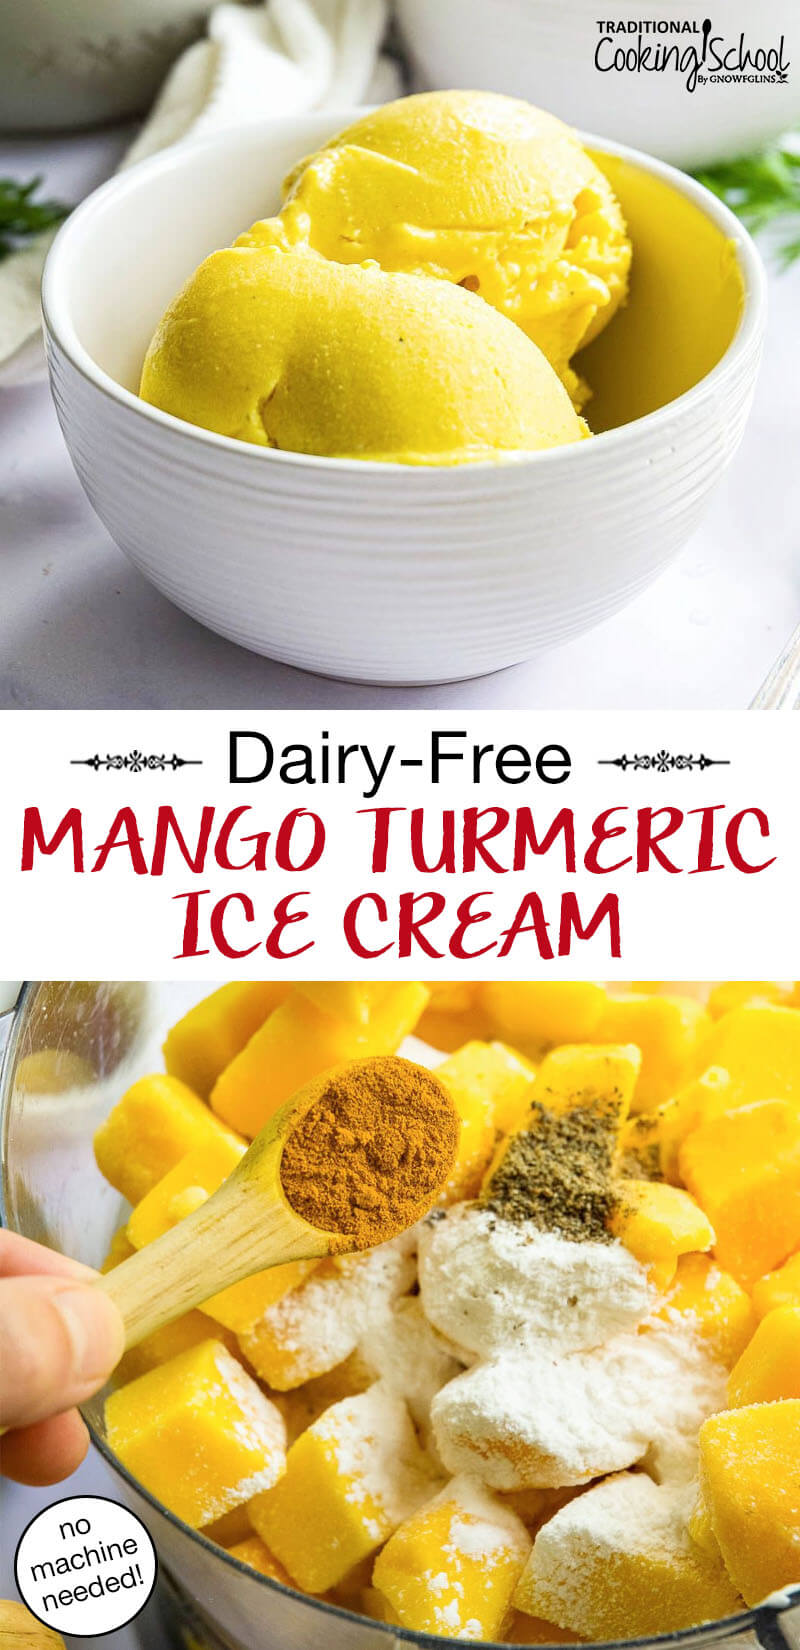 photo collage of bowl of bright yellow scoops of ice cream, and a teaspoon adding spices to the frozen mango mixture. Text overlay says: "Dairy-Free Mango Turmeric Ice Cream (no machine needed!)"